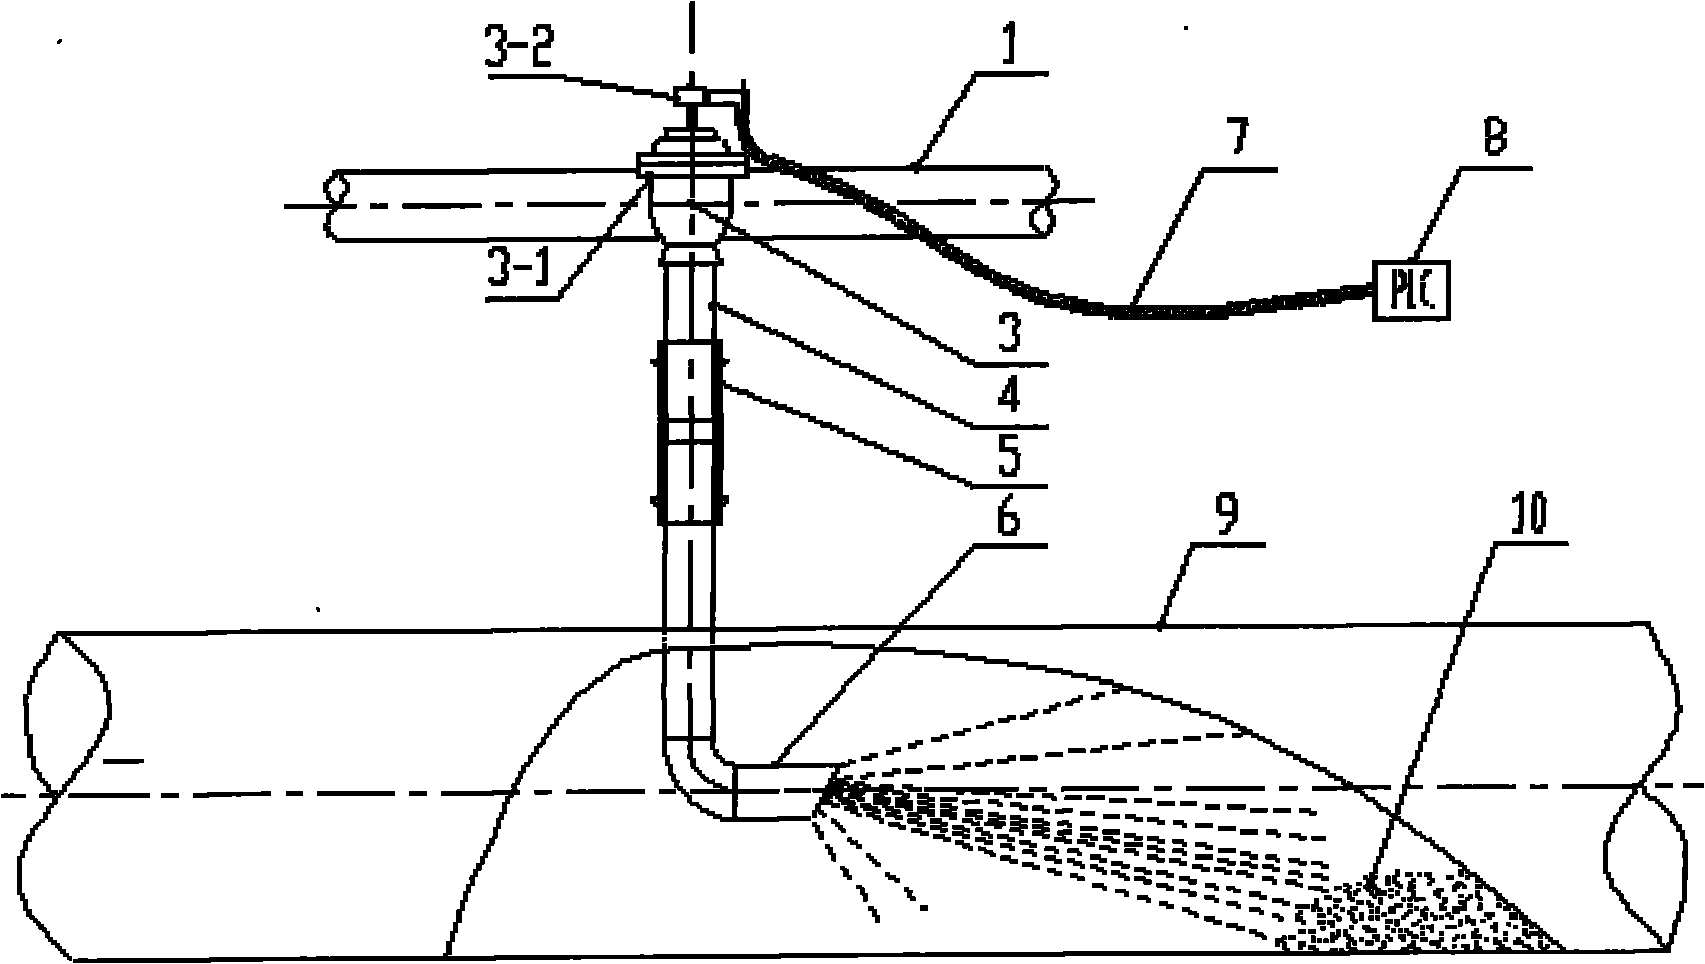 Device for cleaning dust deposited in pipeline